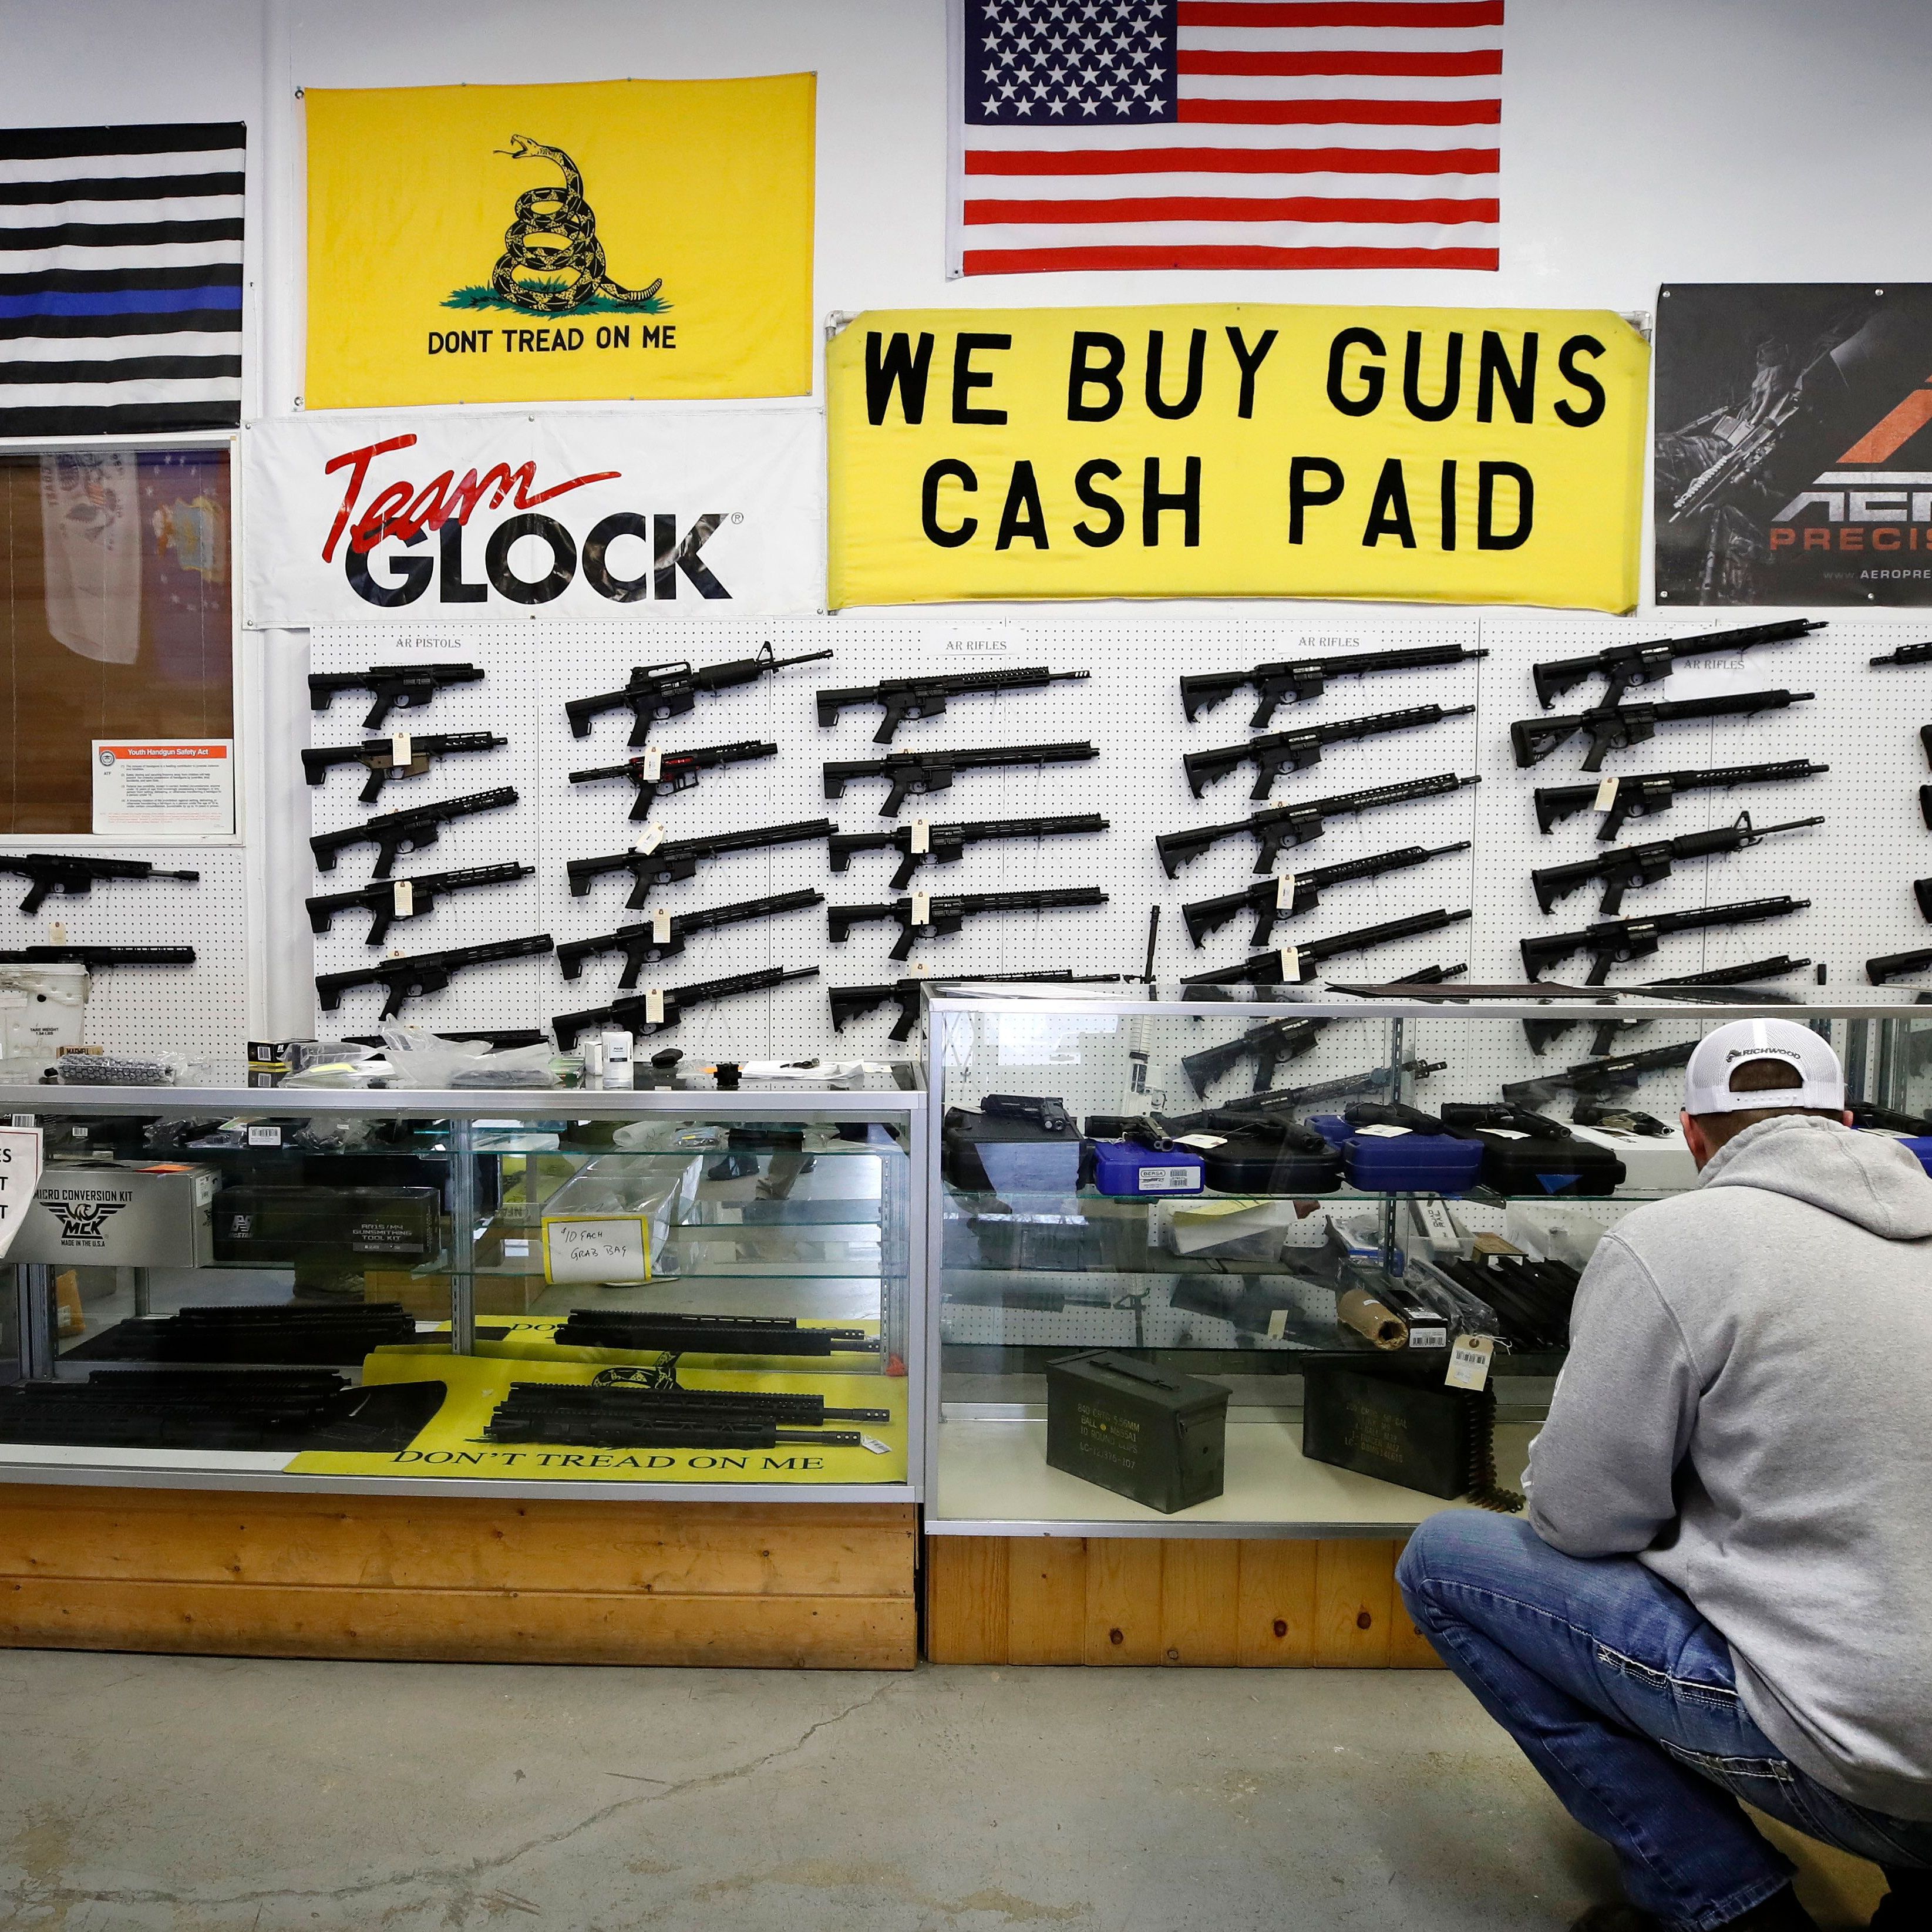 As Long As There Have Been Guns in America, There Have Been Attempts to Regulate Them